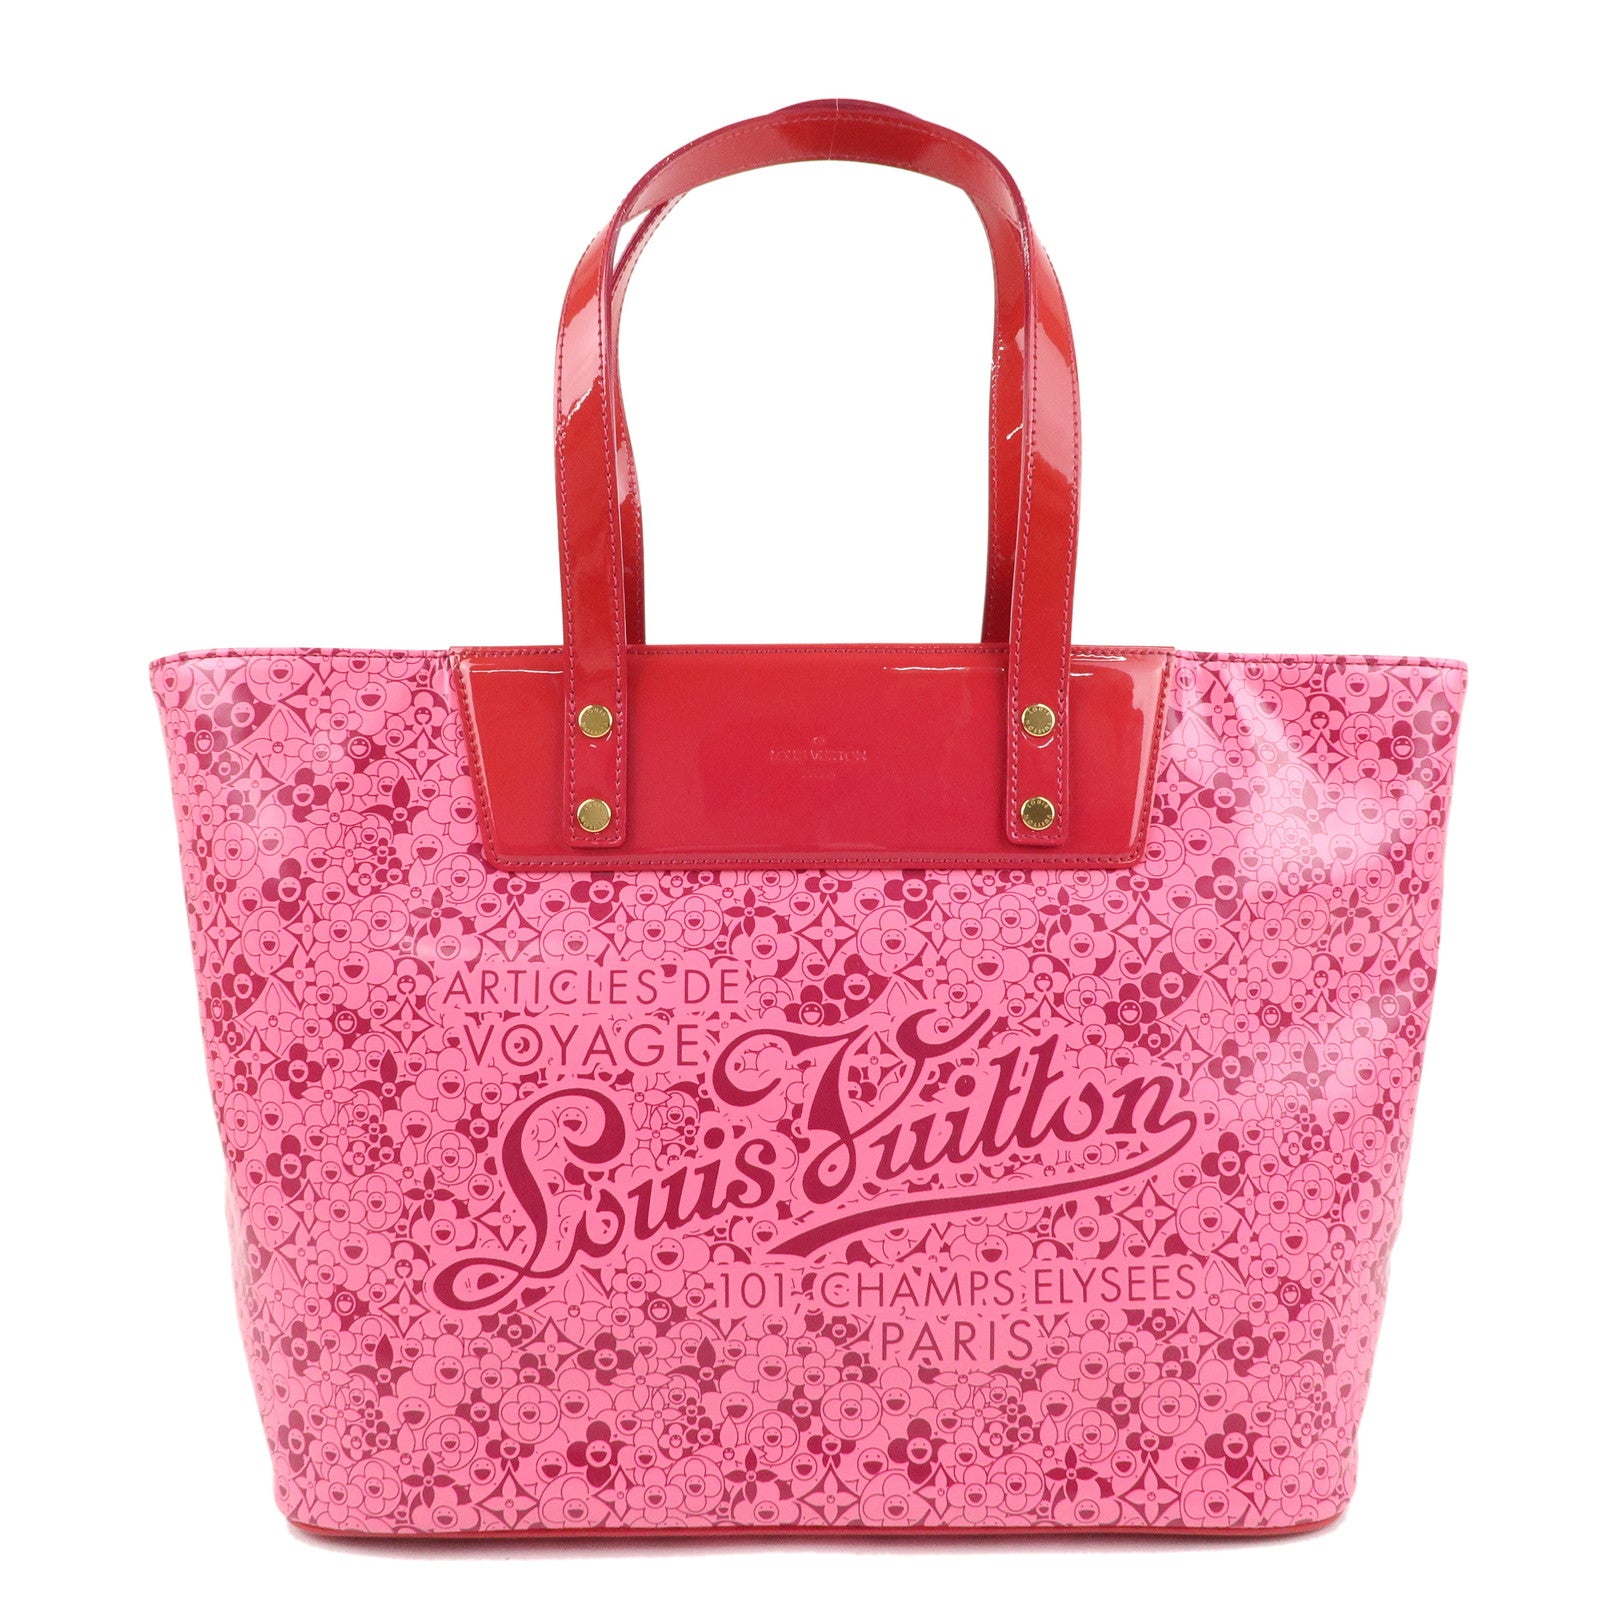 Louis-Vuitton-Cosmic-Blossom-PM-Tote-Bag-Rose-M93166 – dct